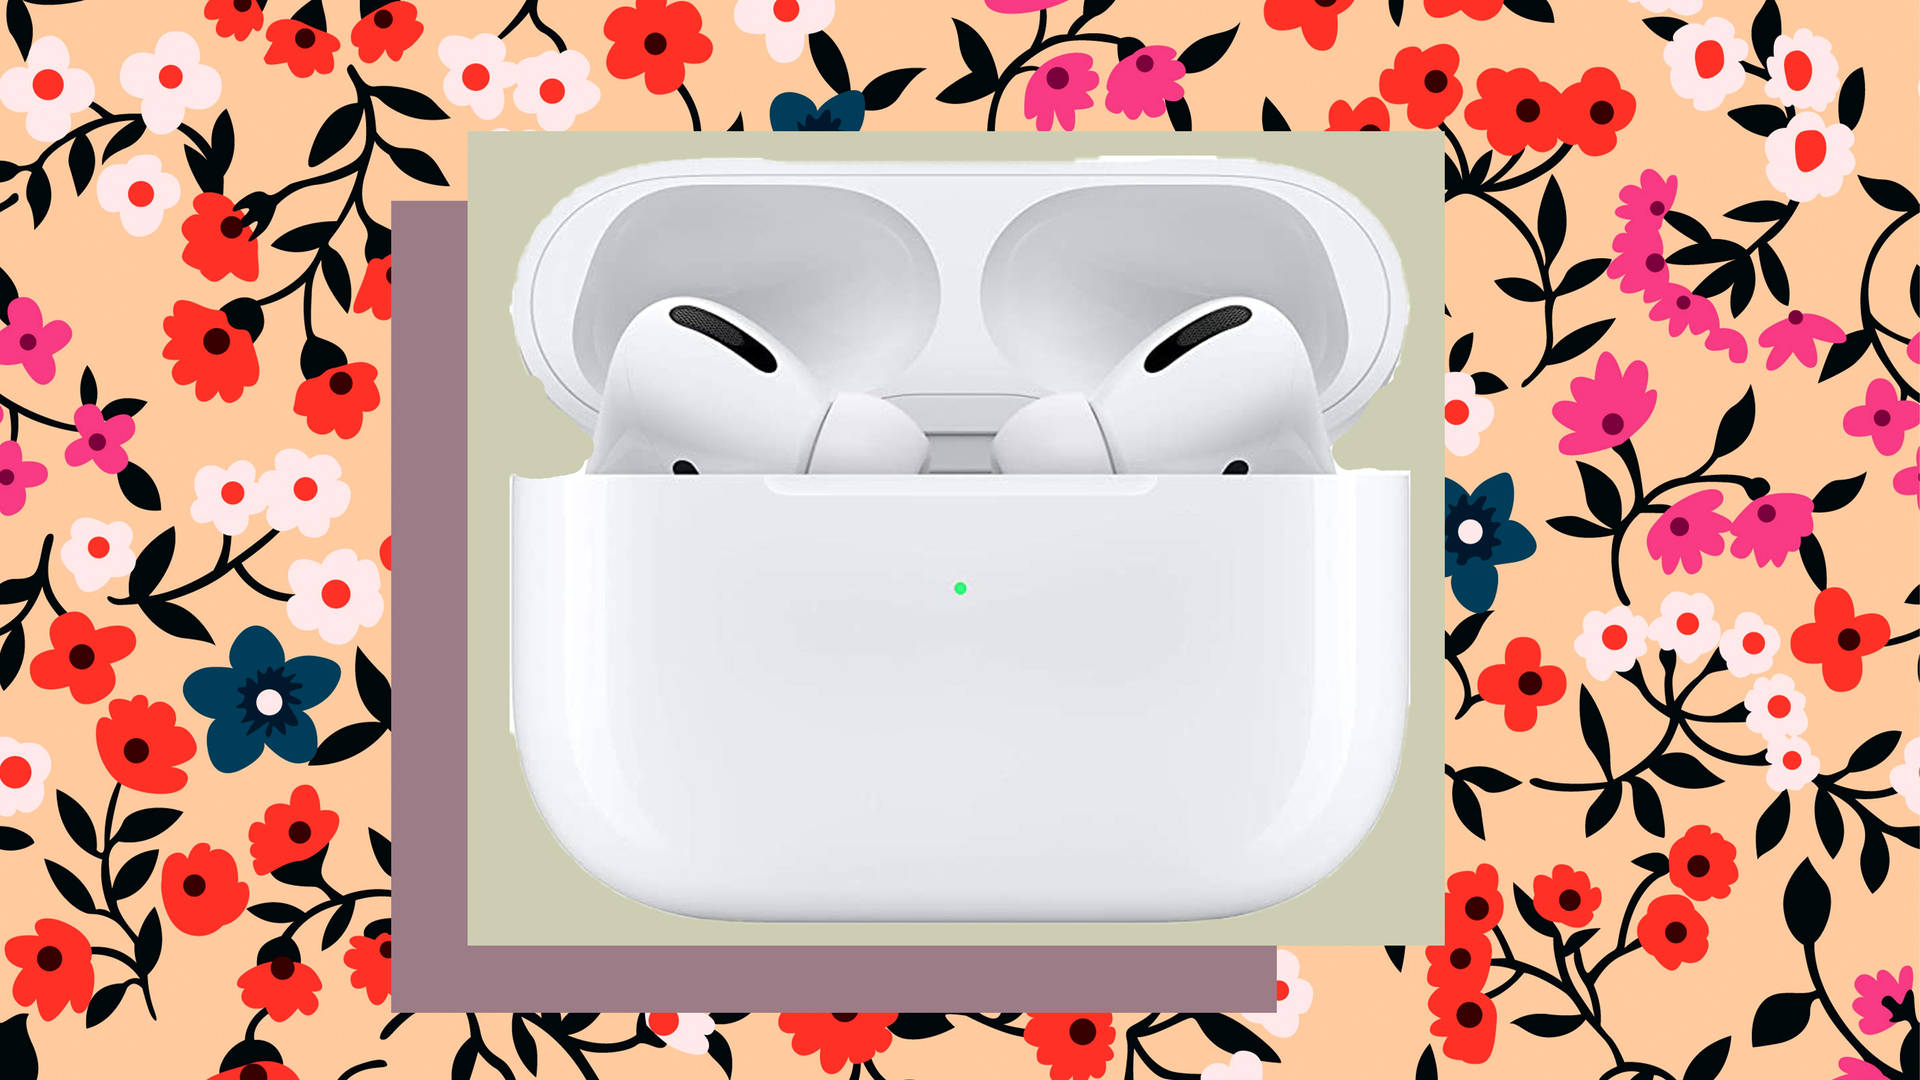 AirPods Pro With Floral Wallpaper